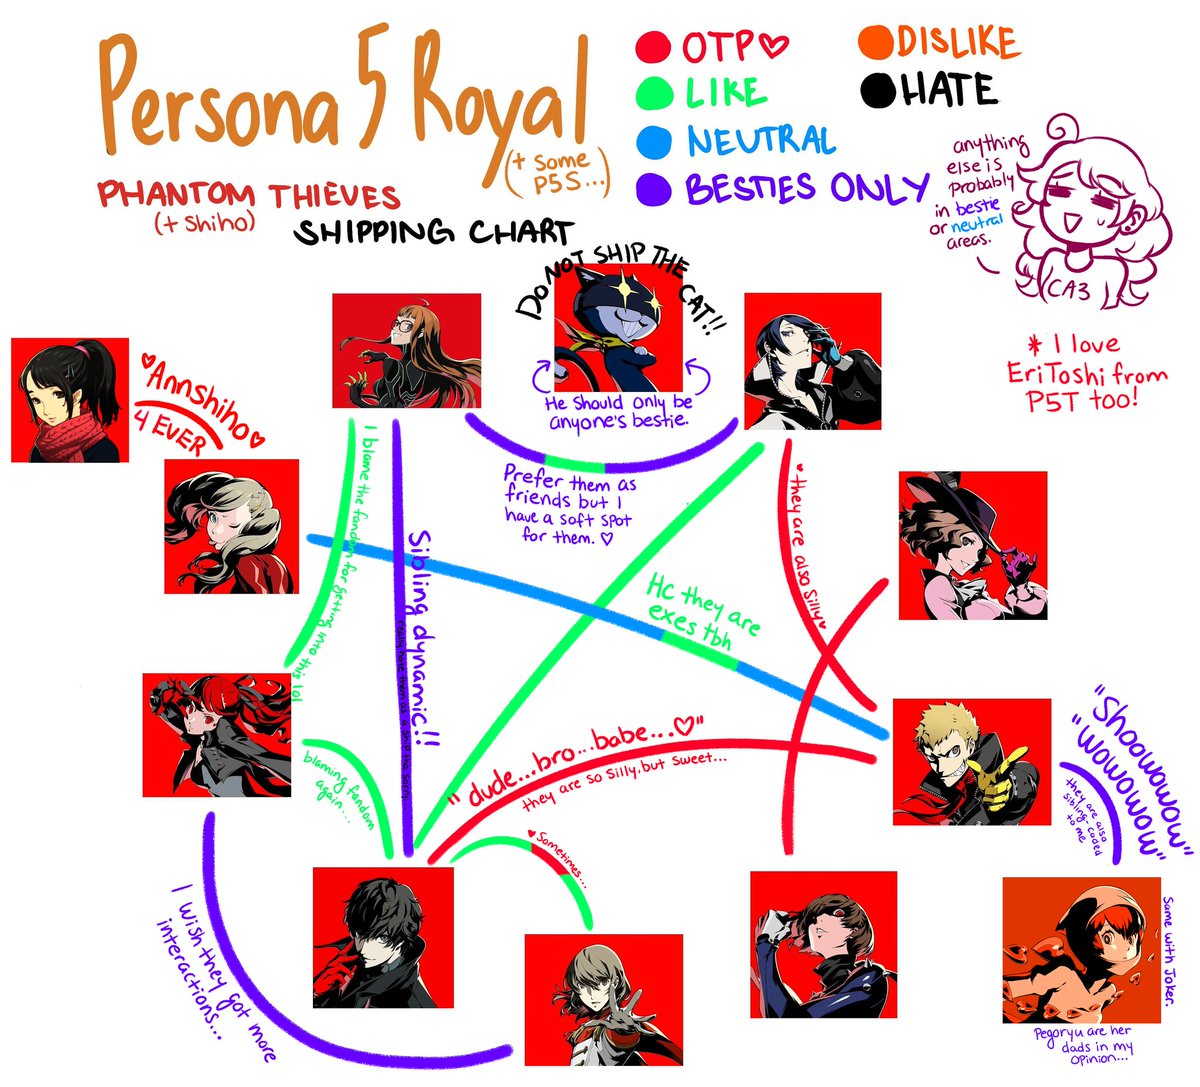 Okay finally sharing my convoluted shipping chart for this game(s), these are just my personal preferences! Red ones are **probably** the ones I draw the most haha ❤️